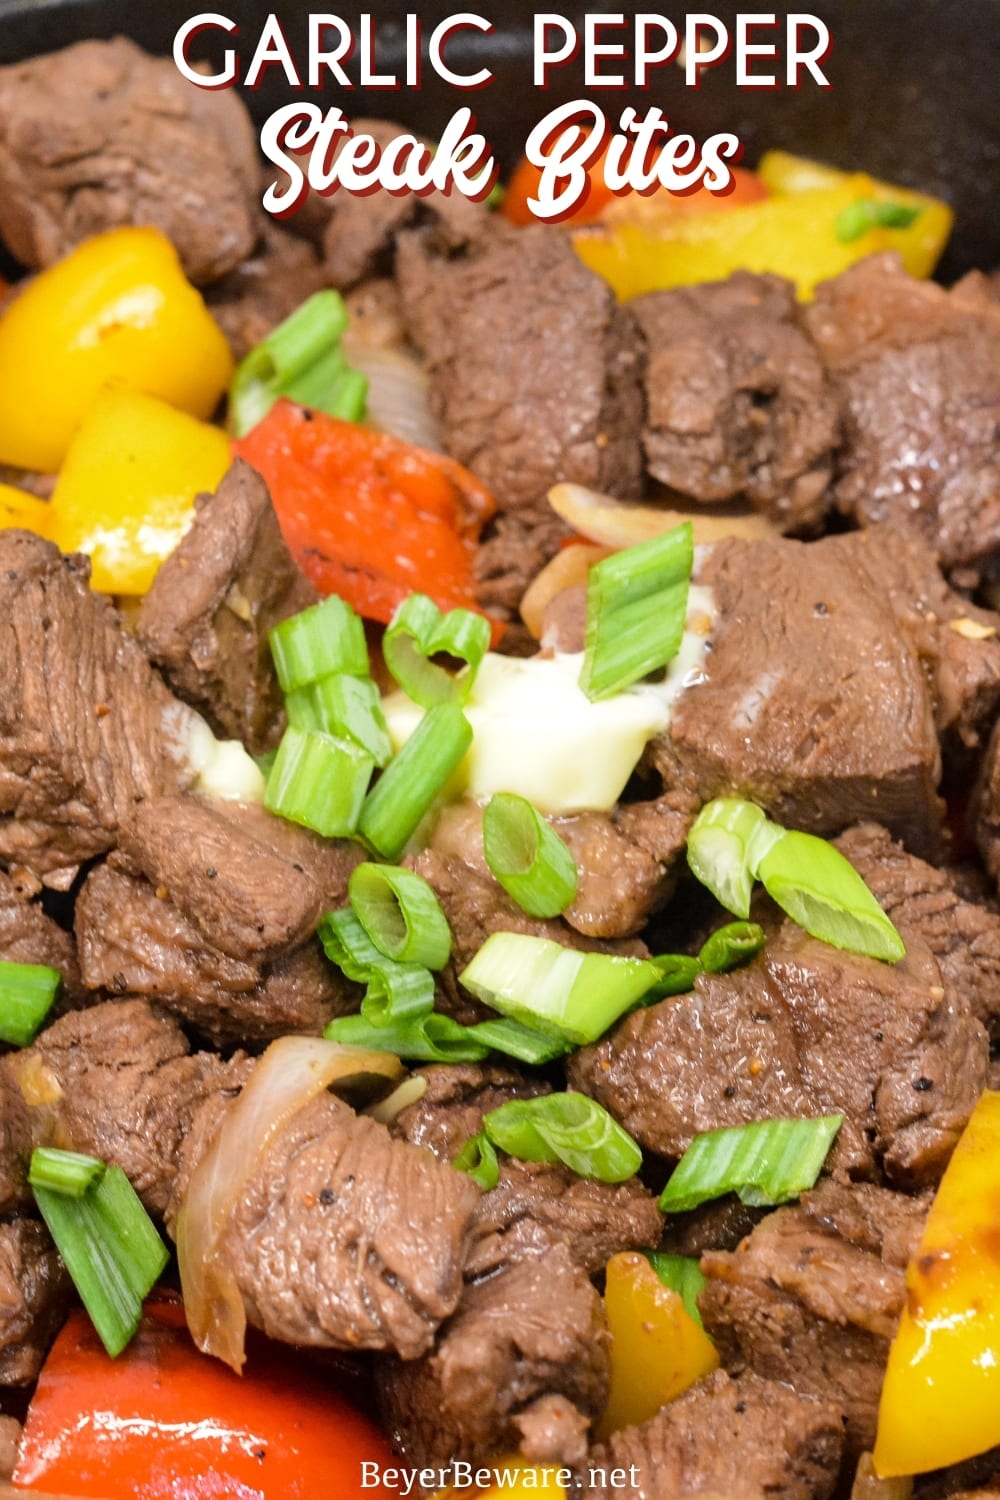 Garlic pepper steak bites recipe is an easy cast iron steak skillet meal made with an easy marinated sirloin steak, garlic, onions, and bell peppers served over mashed potatoes or rice.